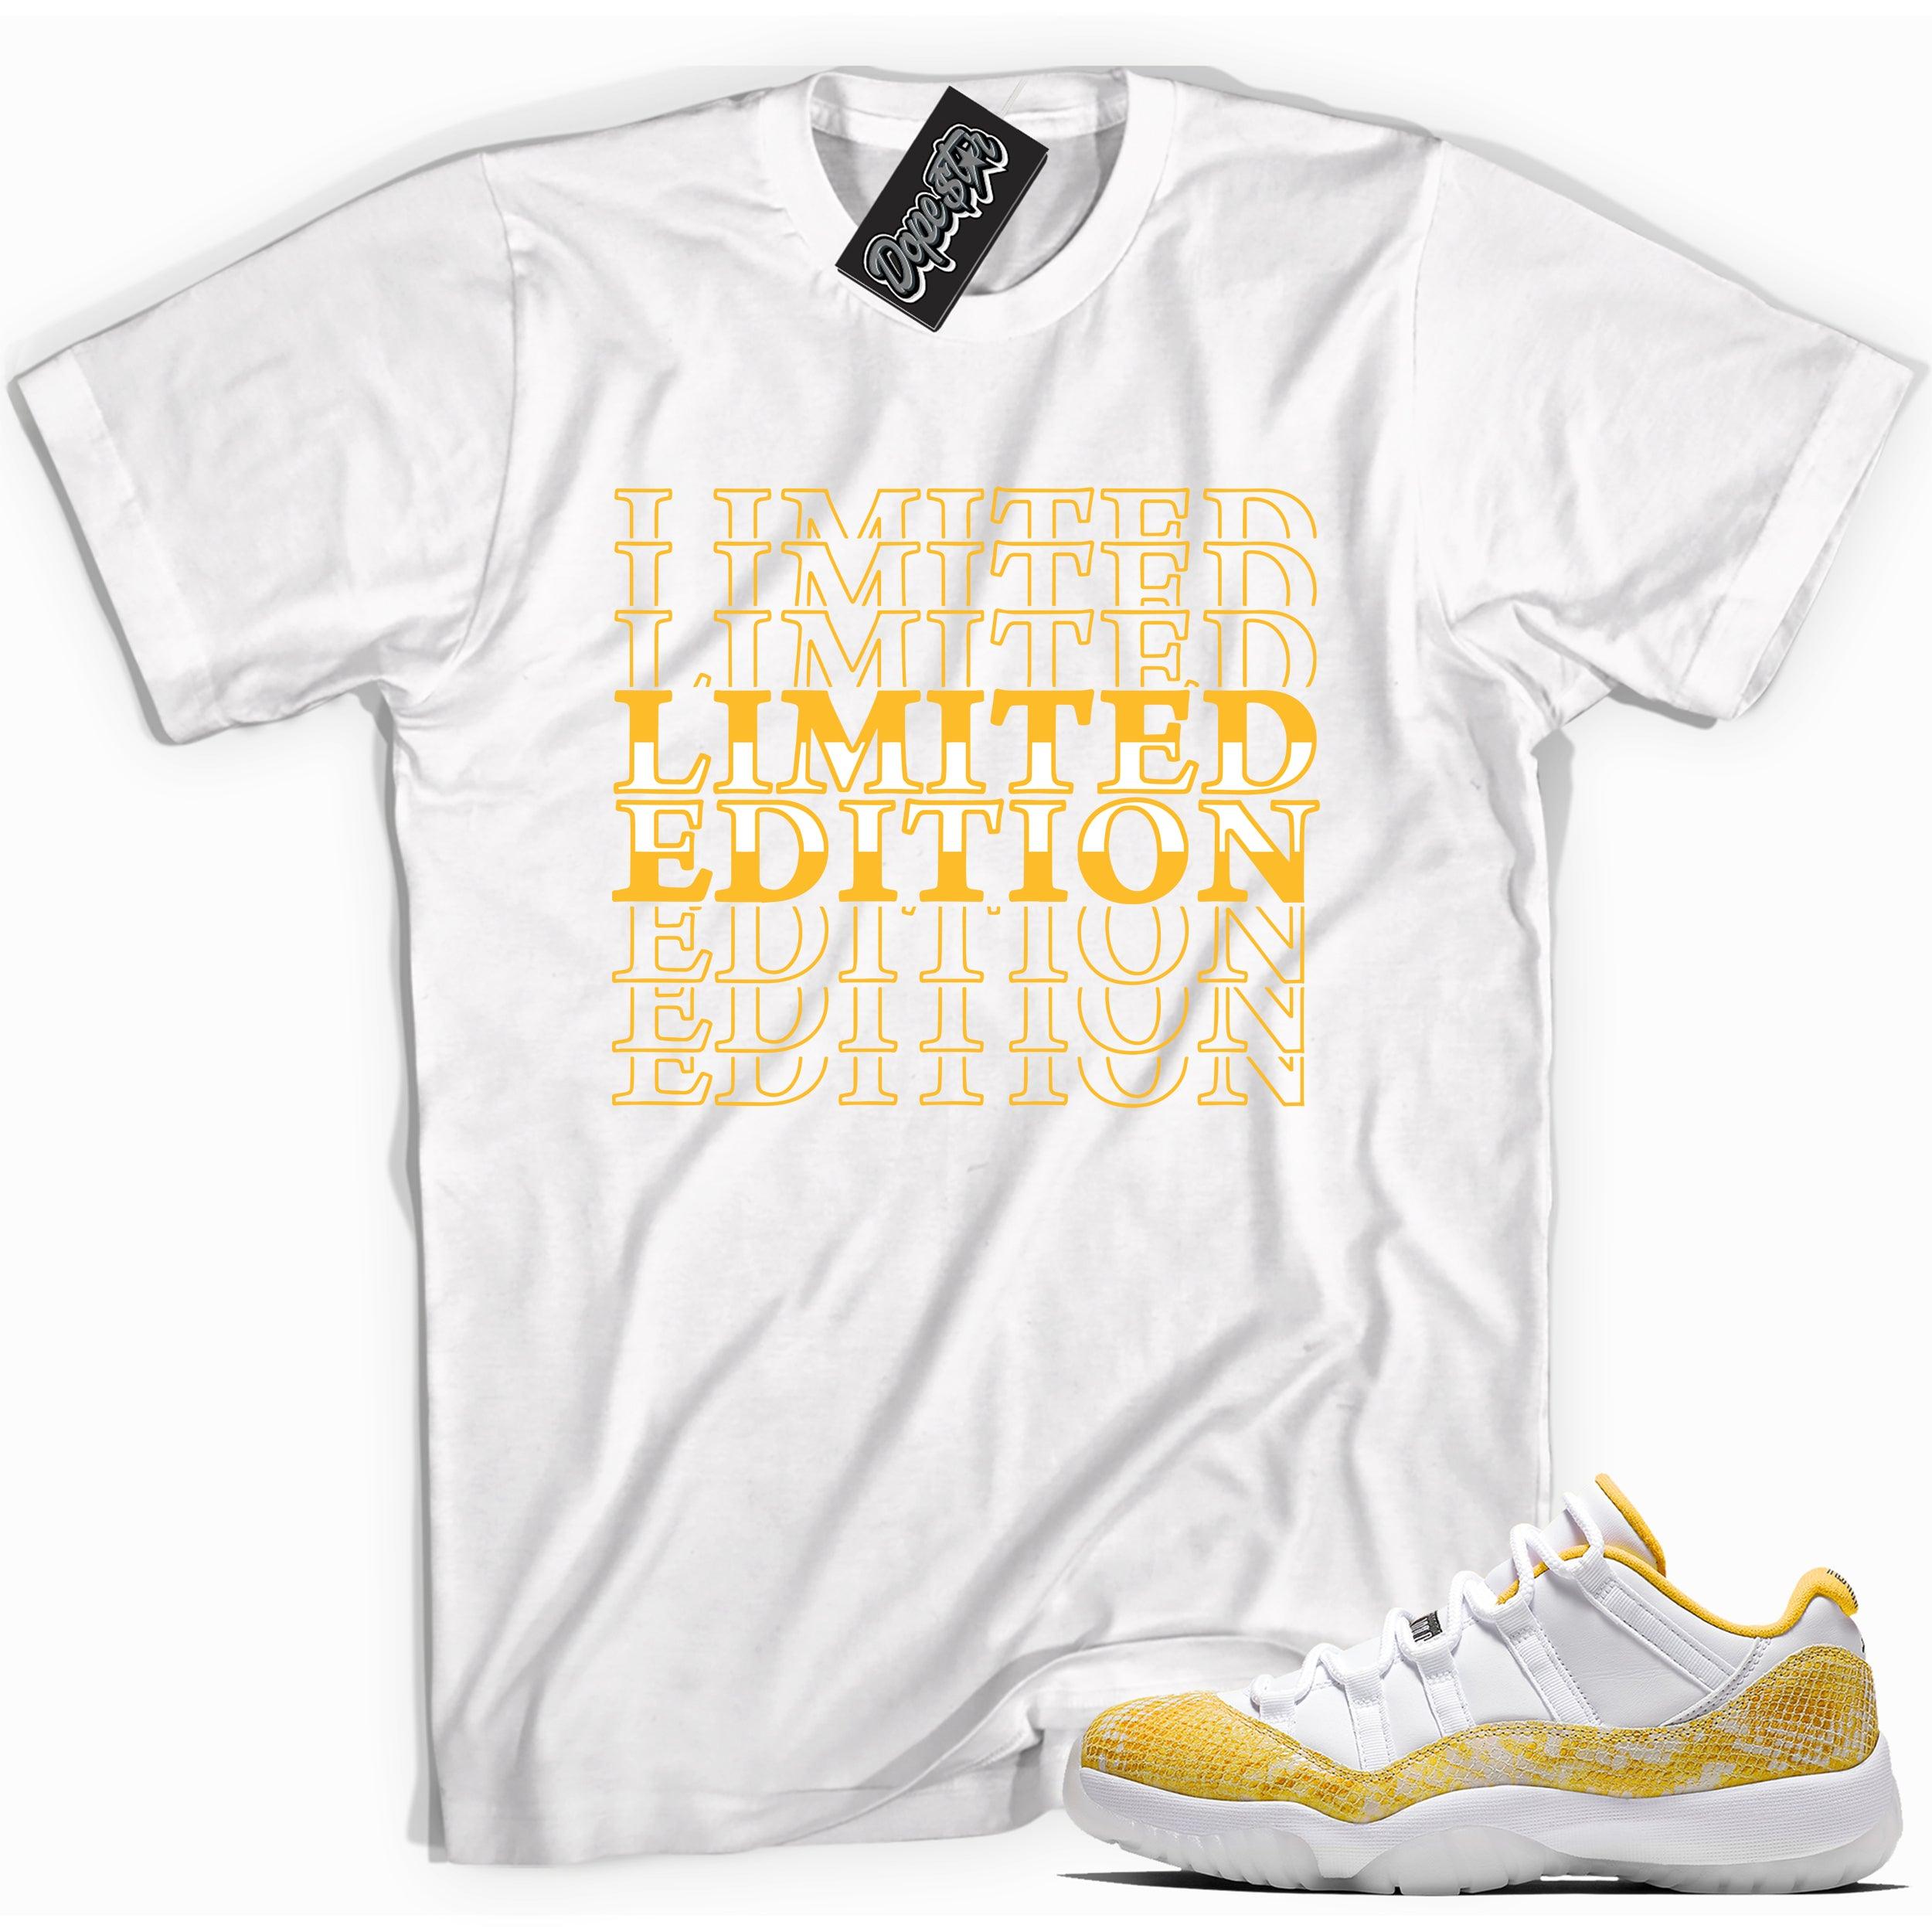 Cool white graphic tee with 'limited edition' print, that perfectly matches Air Jordan 11 Retro Low Yellow Snakeskin sneakers